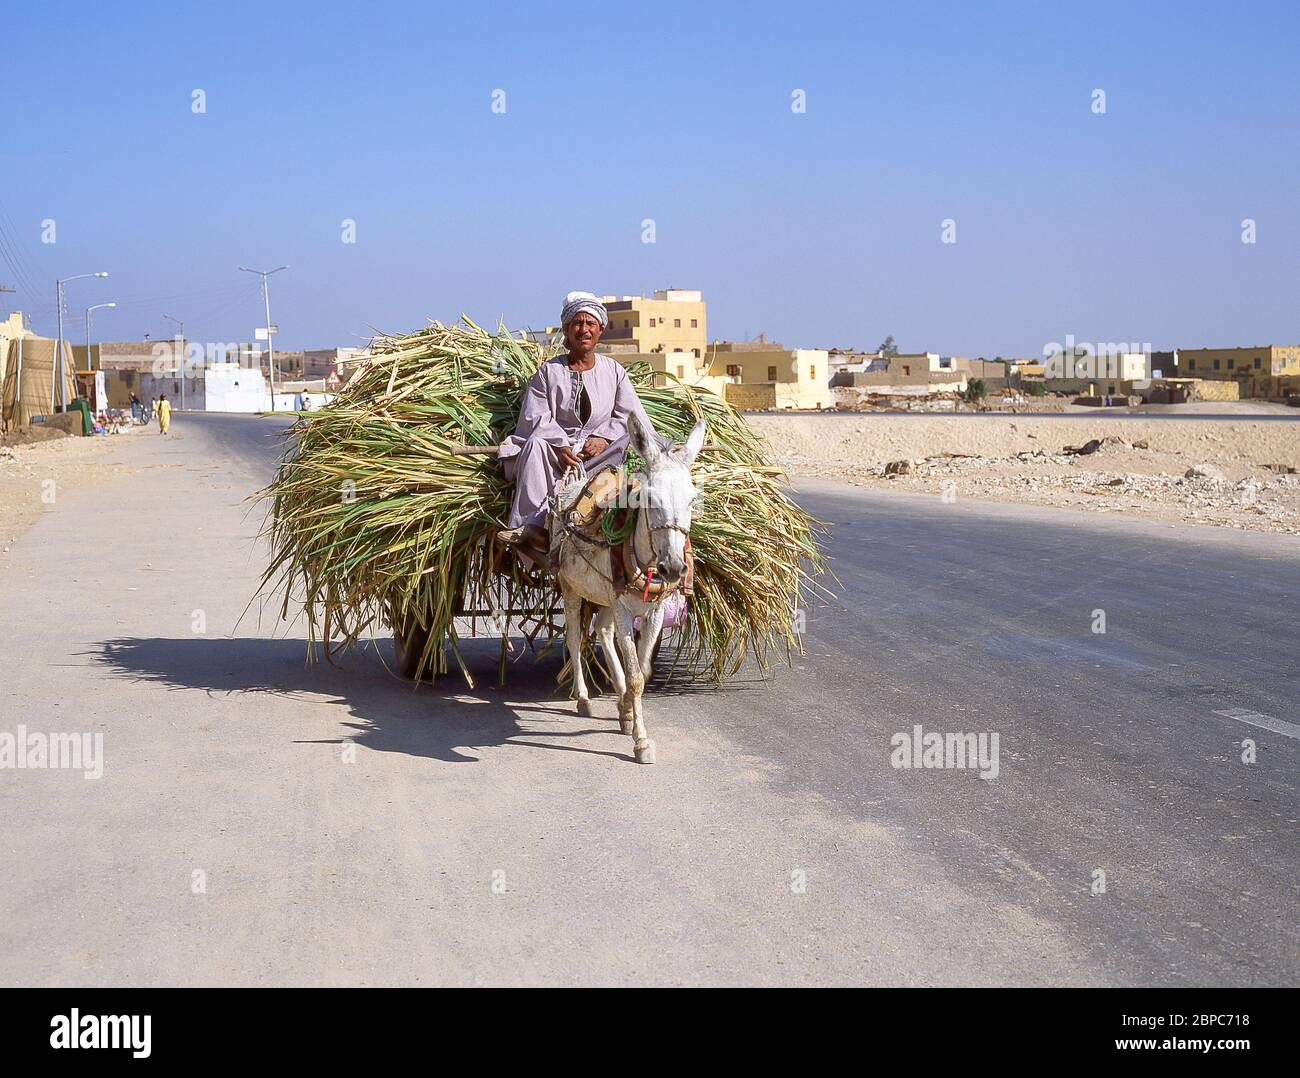 Local man riding donkey cart on road to Luxor, Luxor Governorate, Republic of Egypt Stock Photo